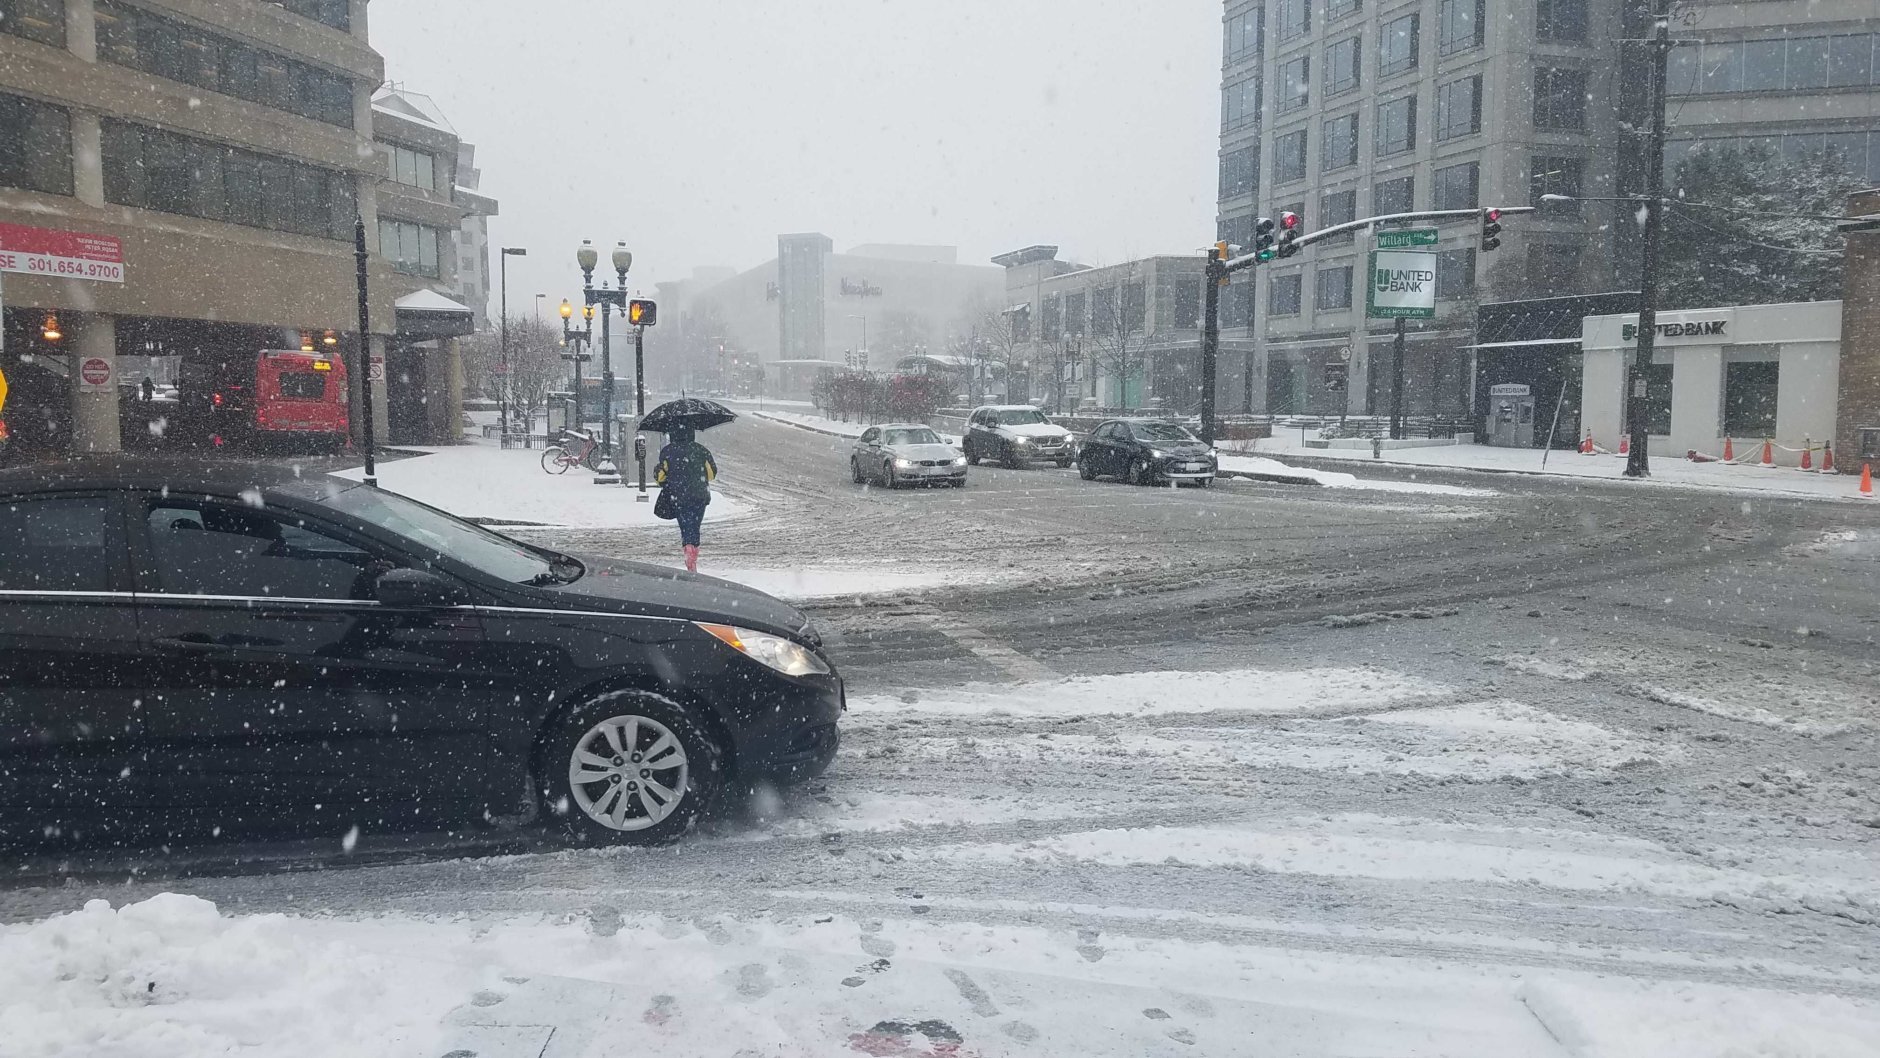 Snow blankets crosswalks and roadways in Chevy Chase. (WTOP/Will Vitka)